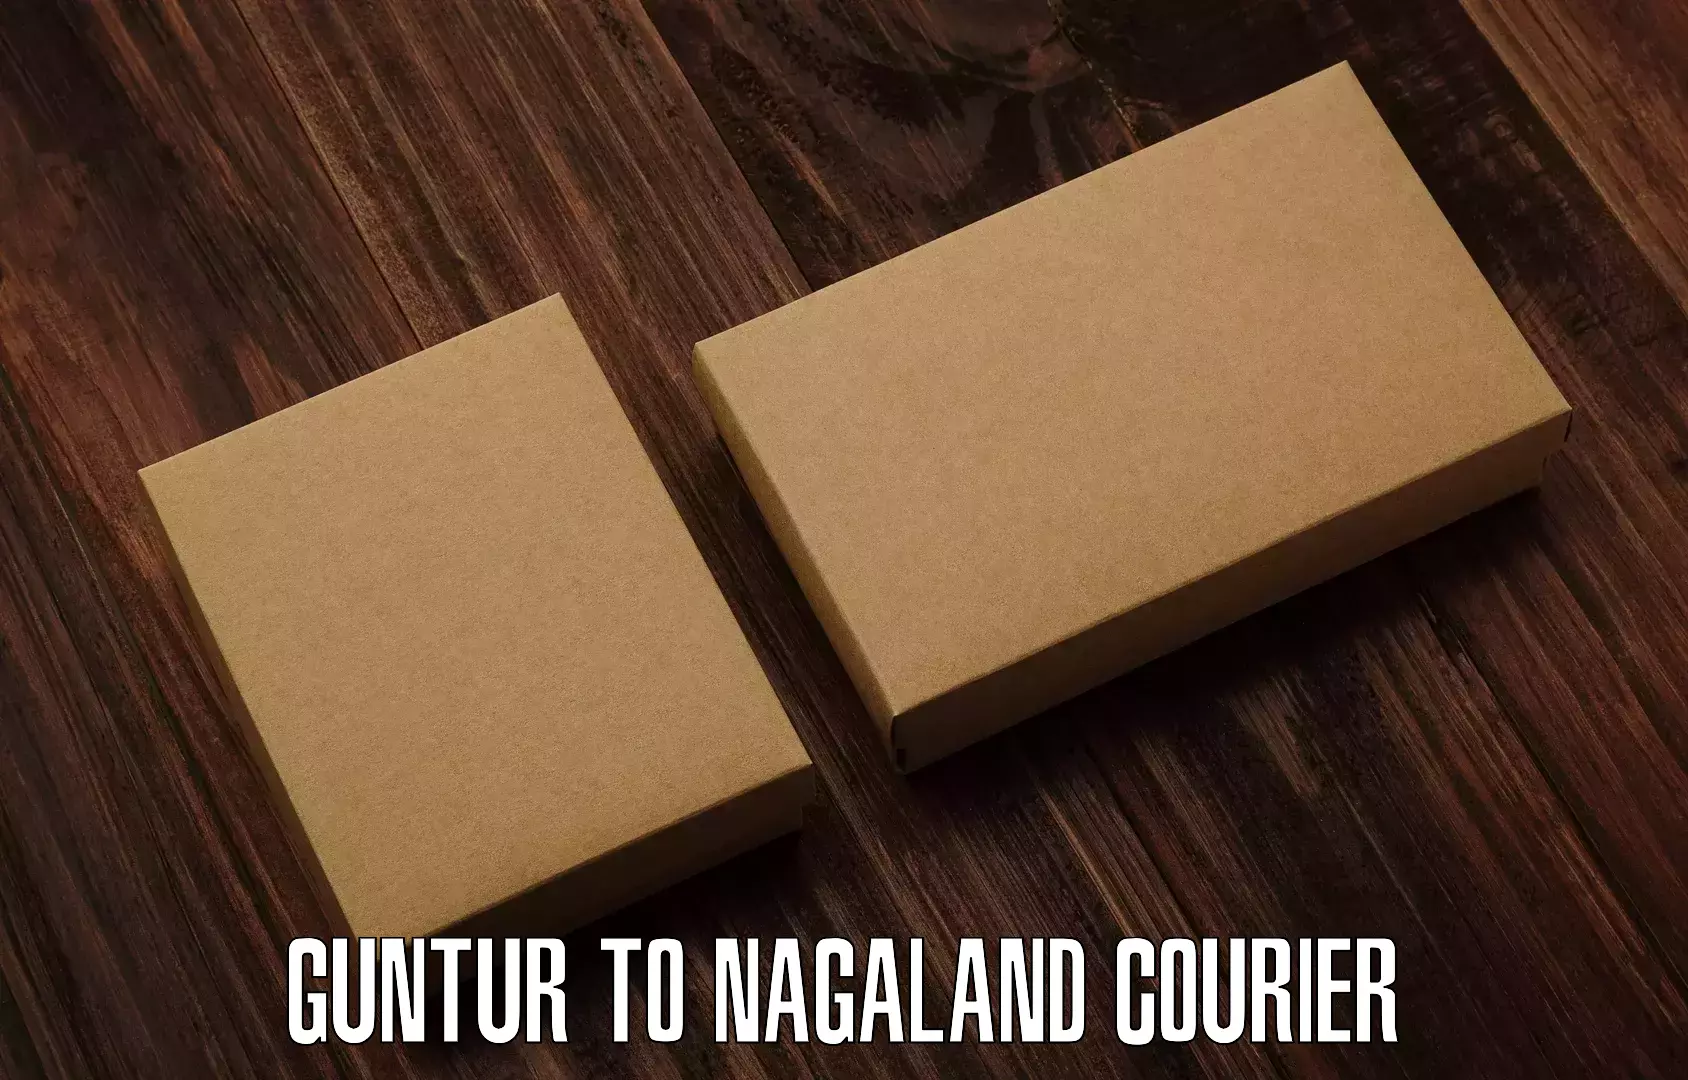 24-hour delivery options Guntur to Nagaland